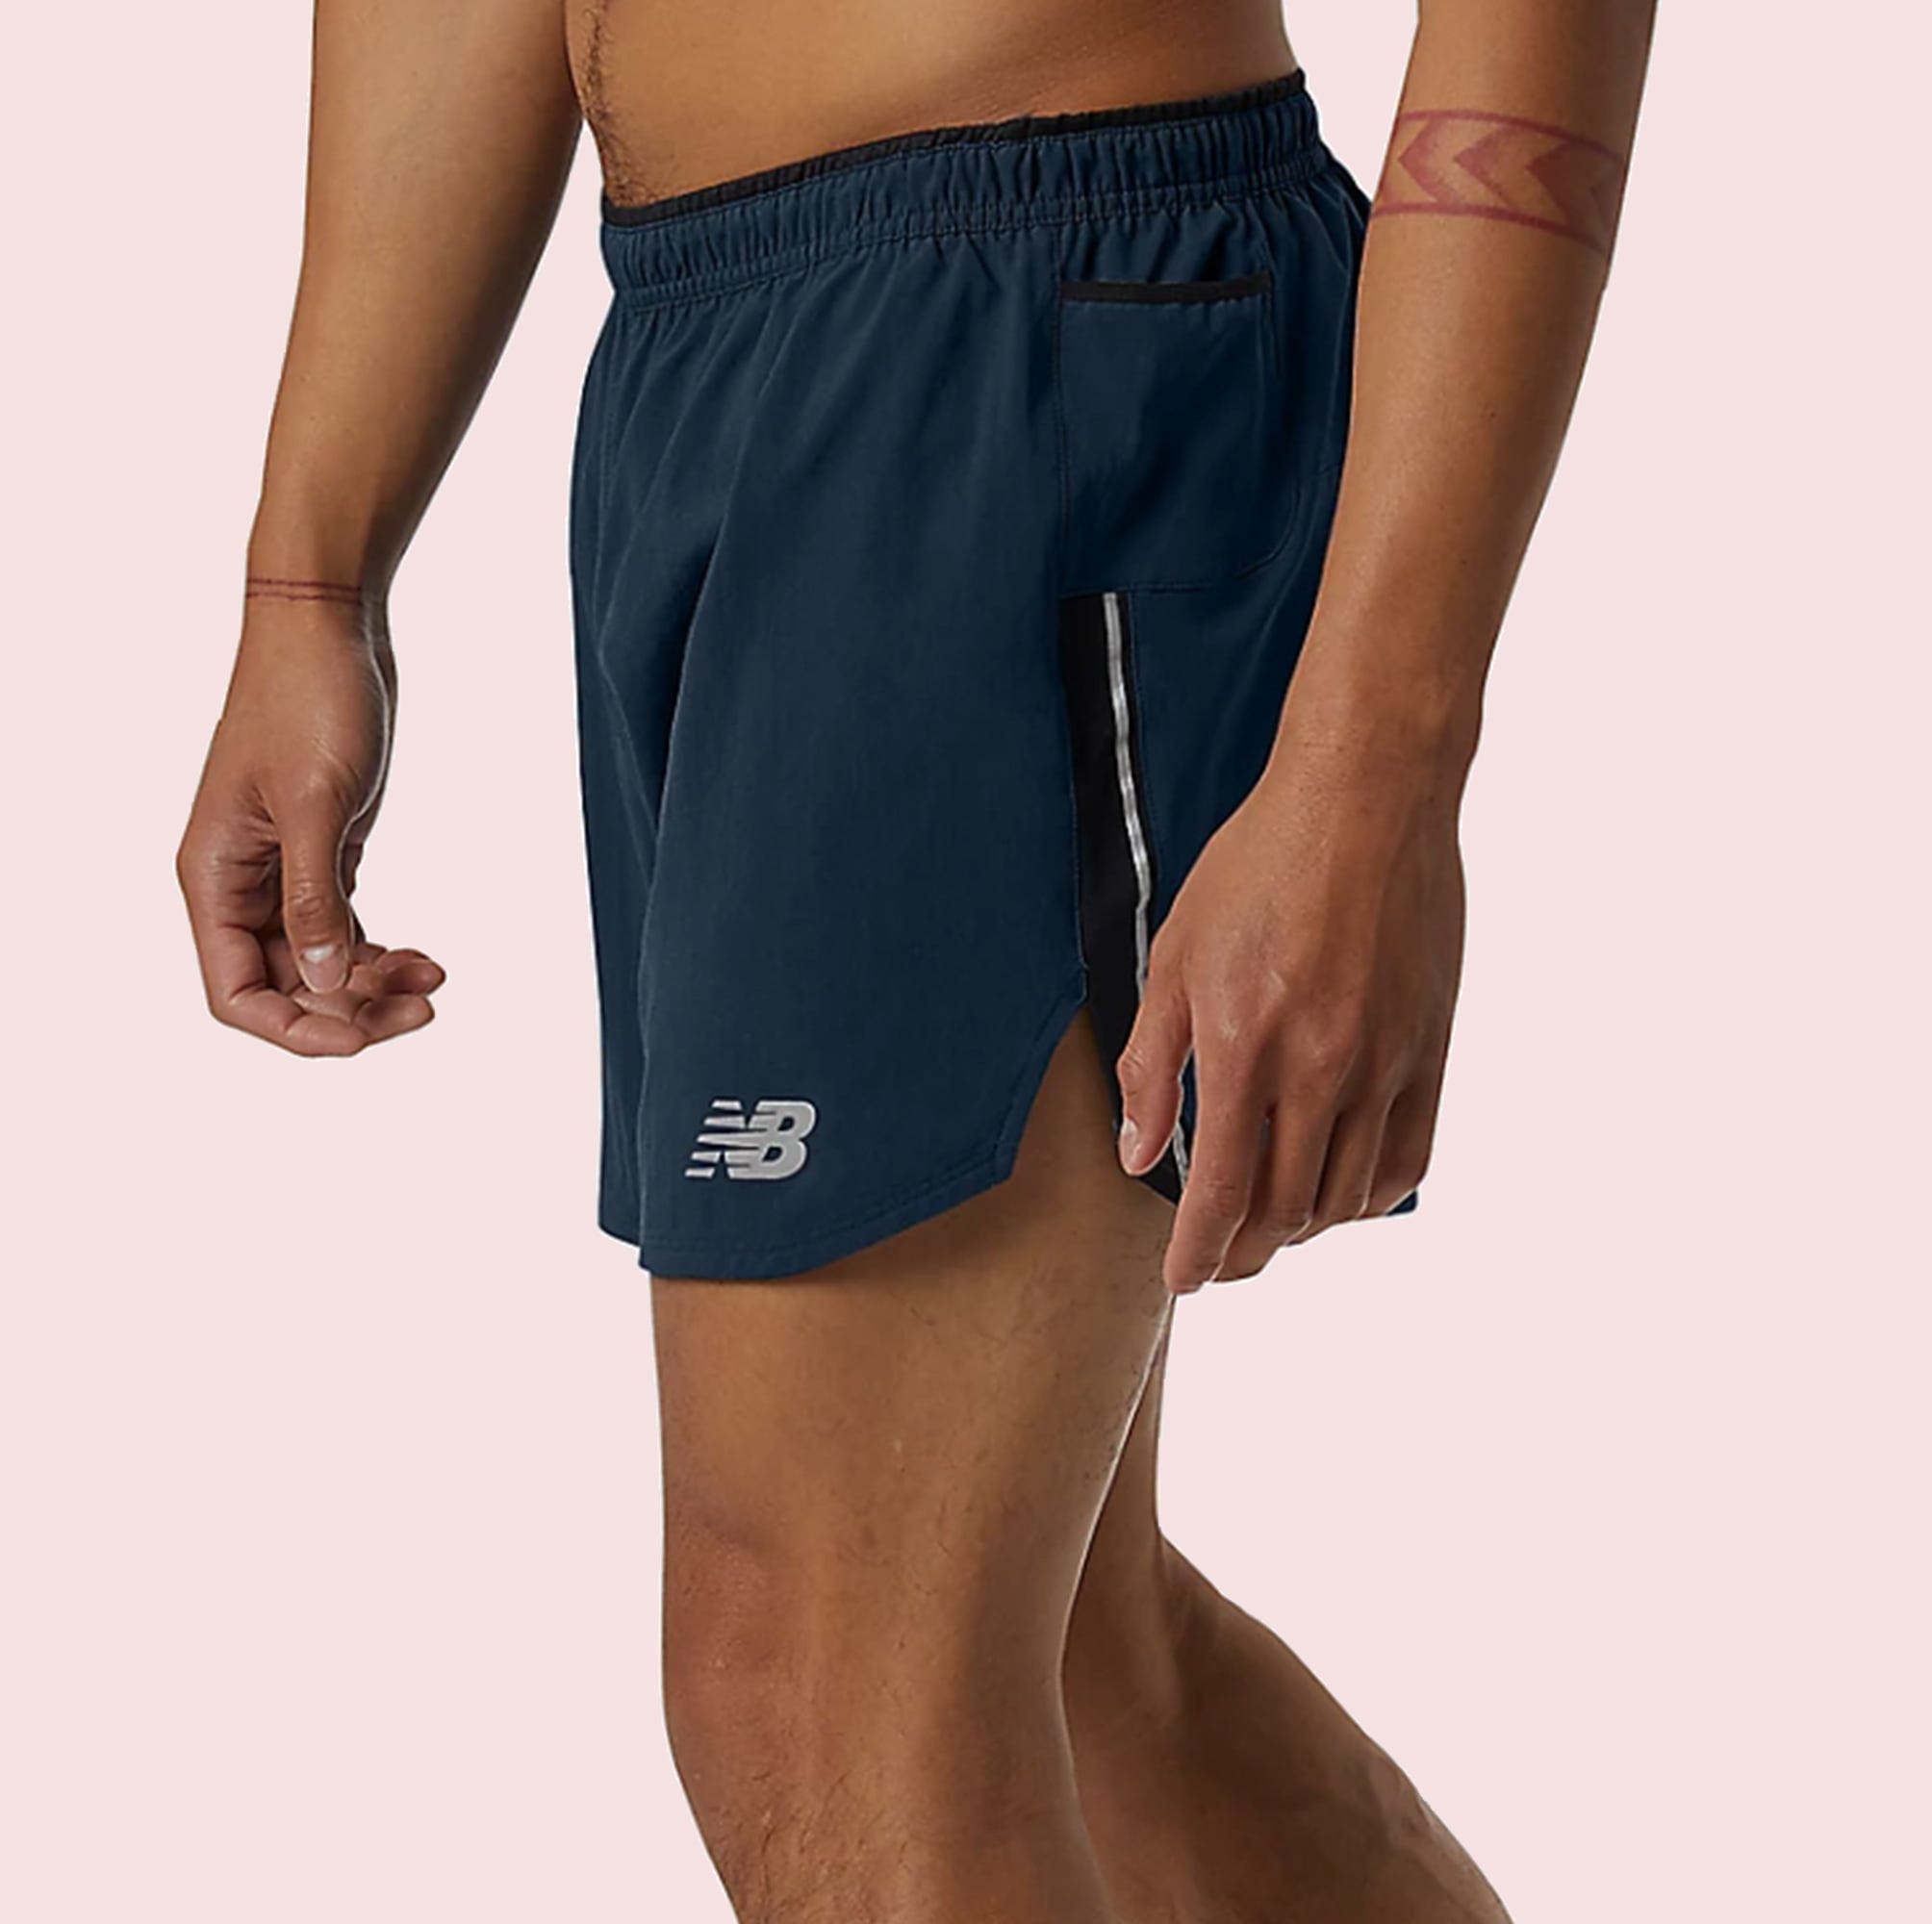 The Best Running Shorts for Men Will Make You Look Like a Pro